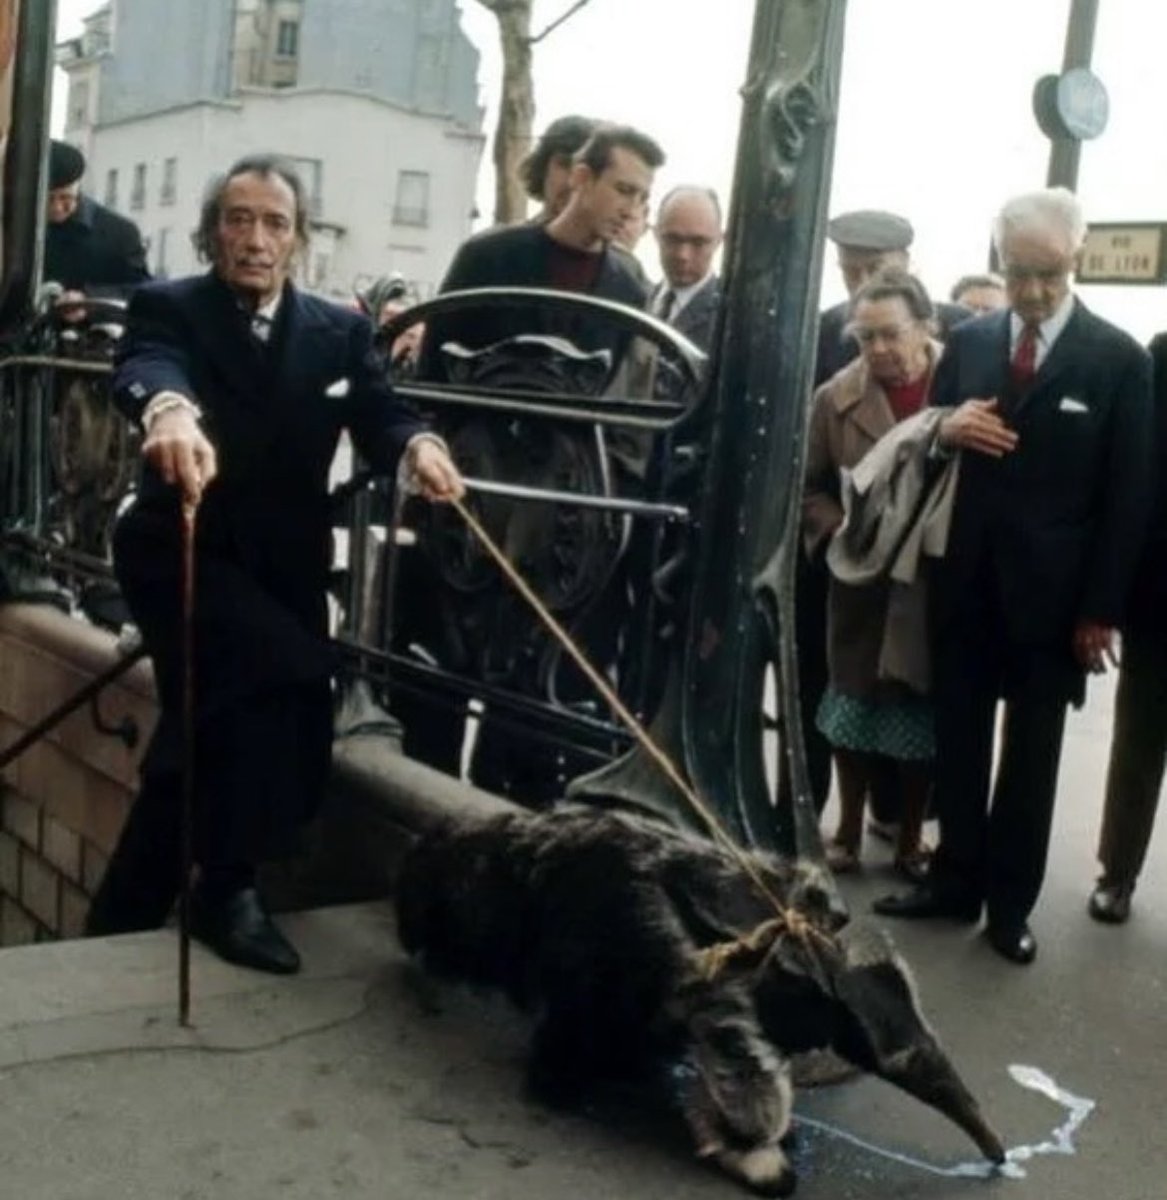 Salvador Dalí walking his pet anteater in Paris, 1969

Salvador Dalí, the renowned surrealist artist, had a penchant for the unconventional in both his artwork and personal life. One of his most peculiar choices was his pet anteater, which became a symbol of his eccentricity and